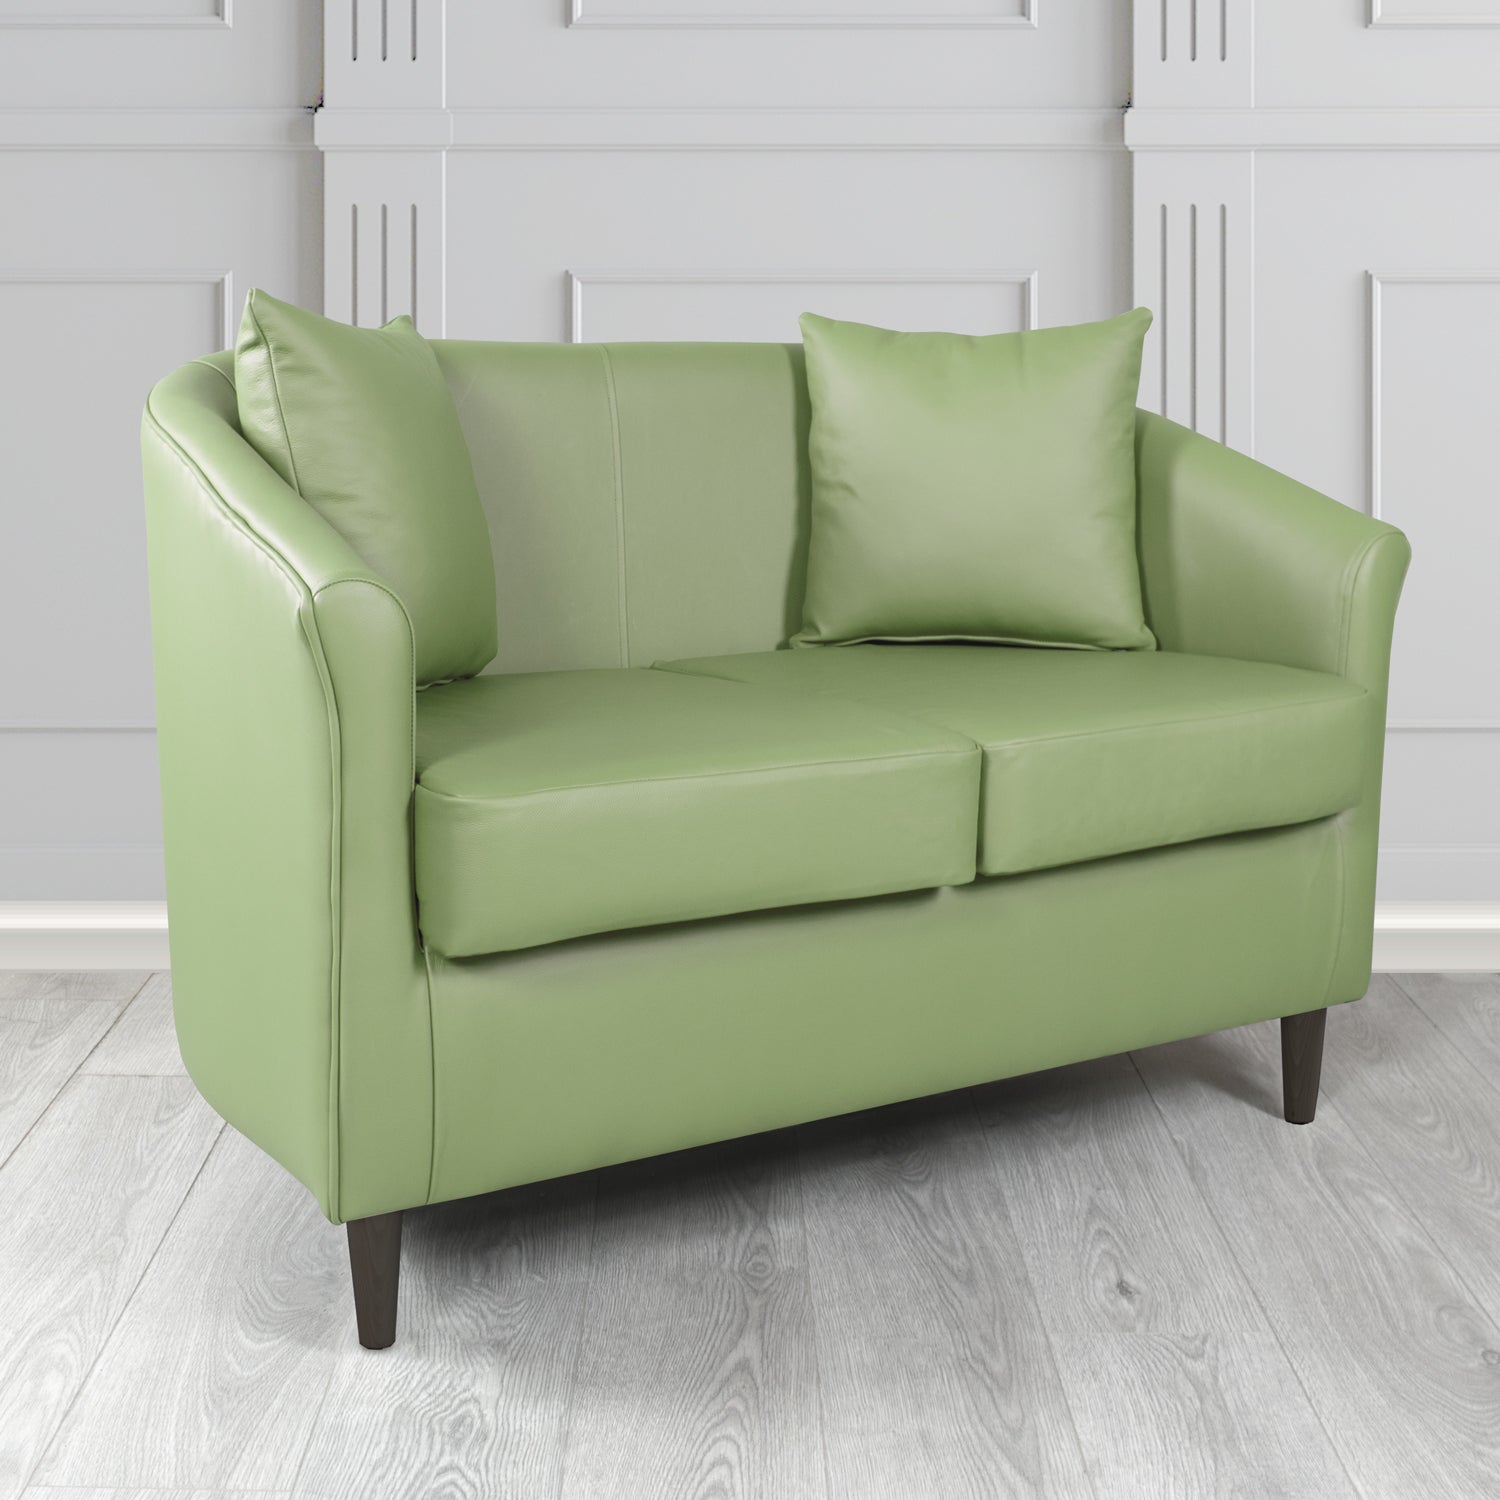 St Tropez Shelly Thyme Green Crib 5 Genuine Leather 2 Seater Tub Sofa with Scatter Cushions - The Tub Chair Shop